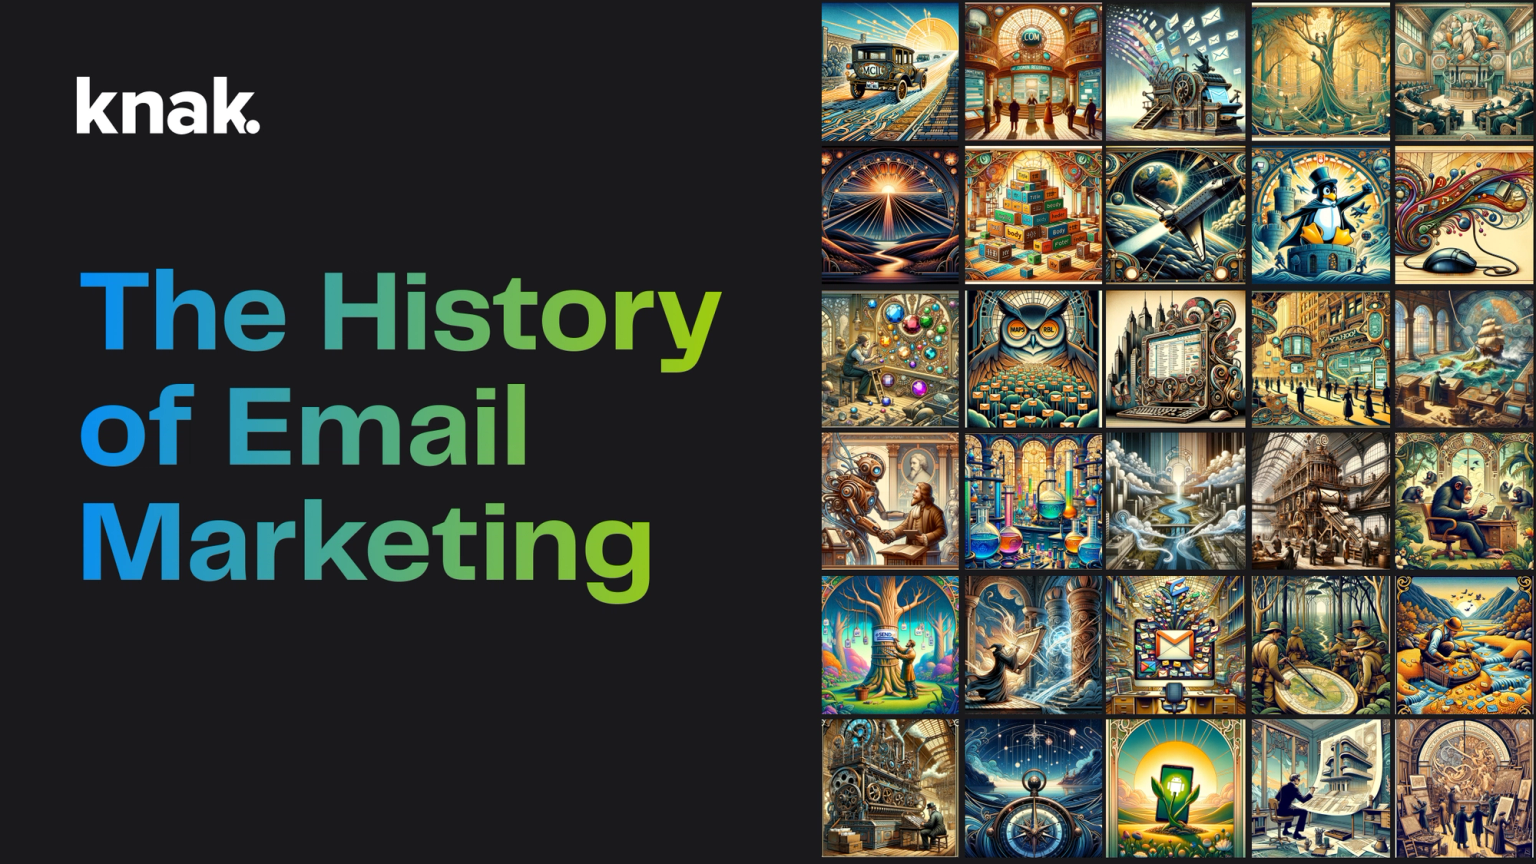 The History of Email Marketing